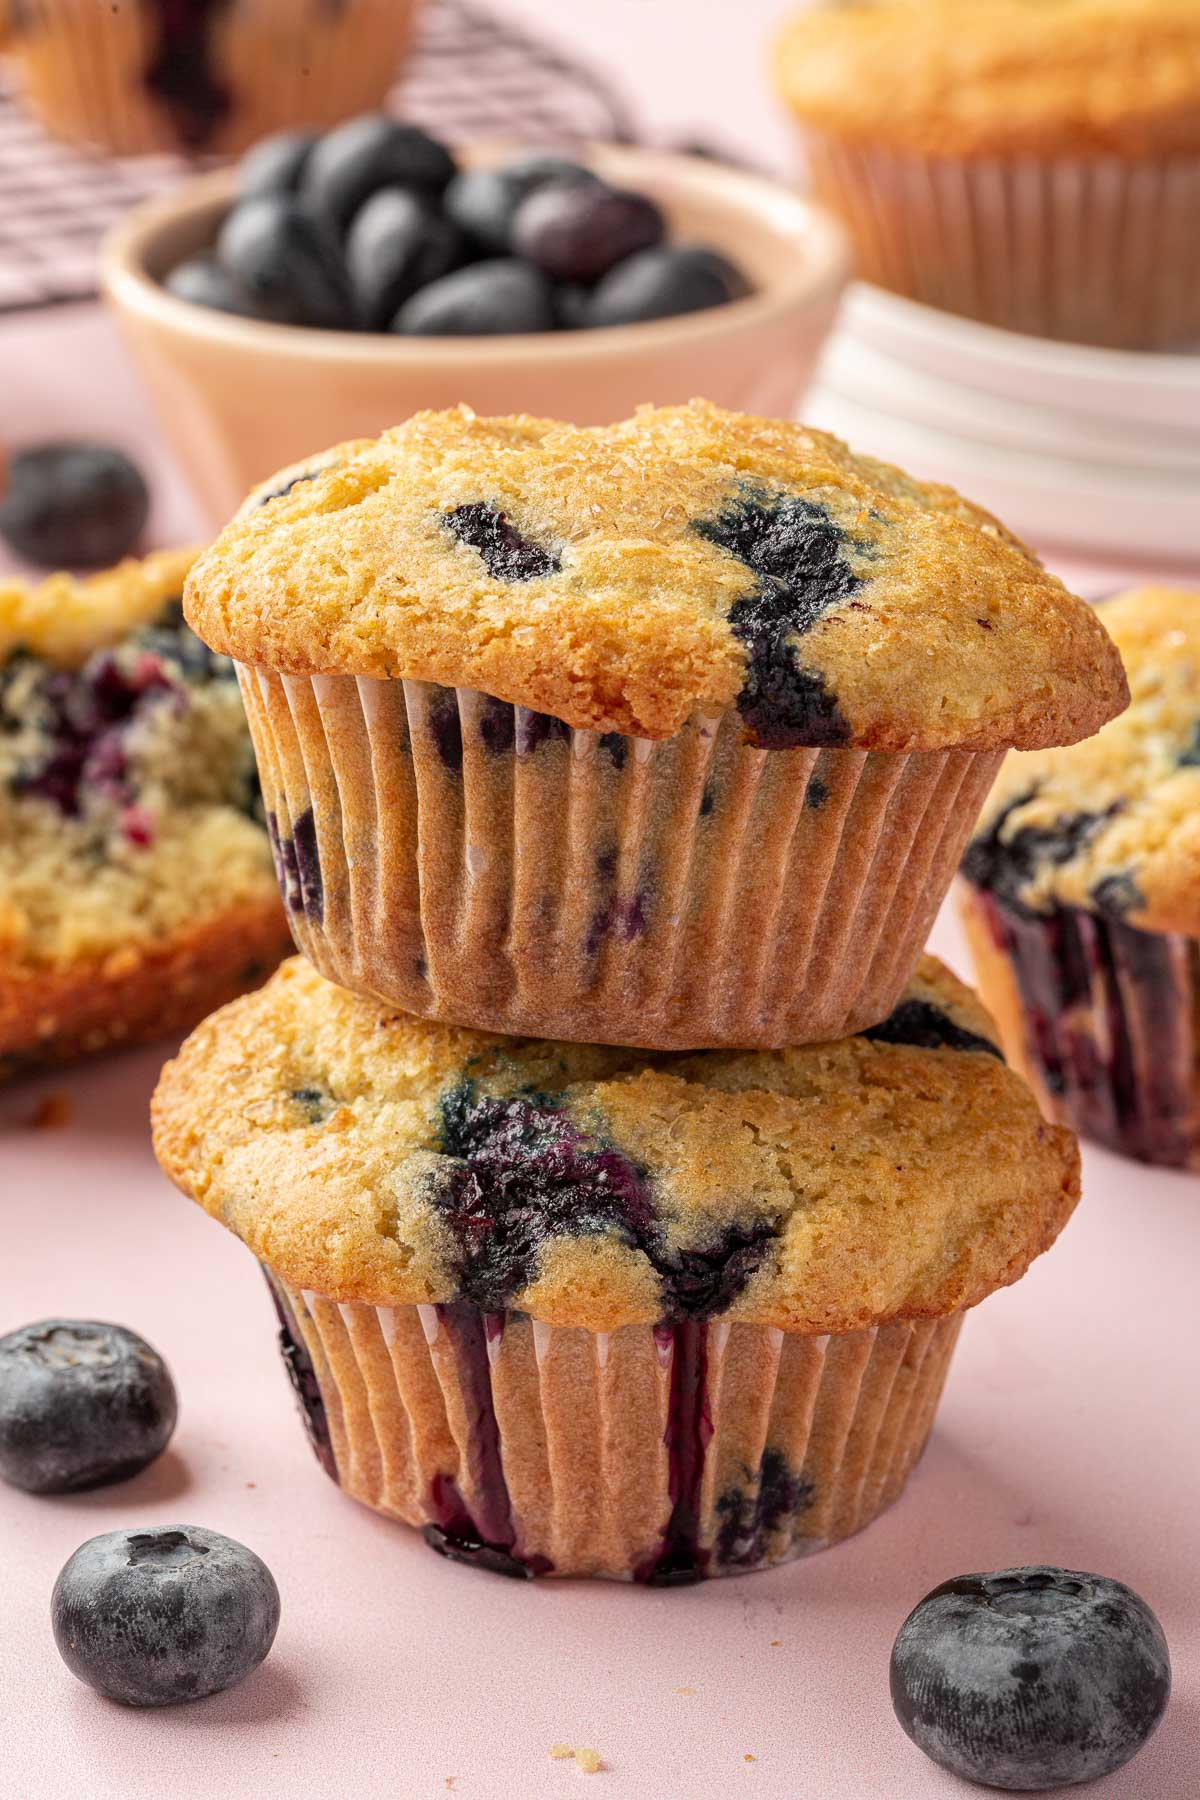 Two gluten free blueberry muffins stacked on top of each other with additional blueberry muffins and fresh blueberries in the background.